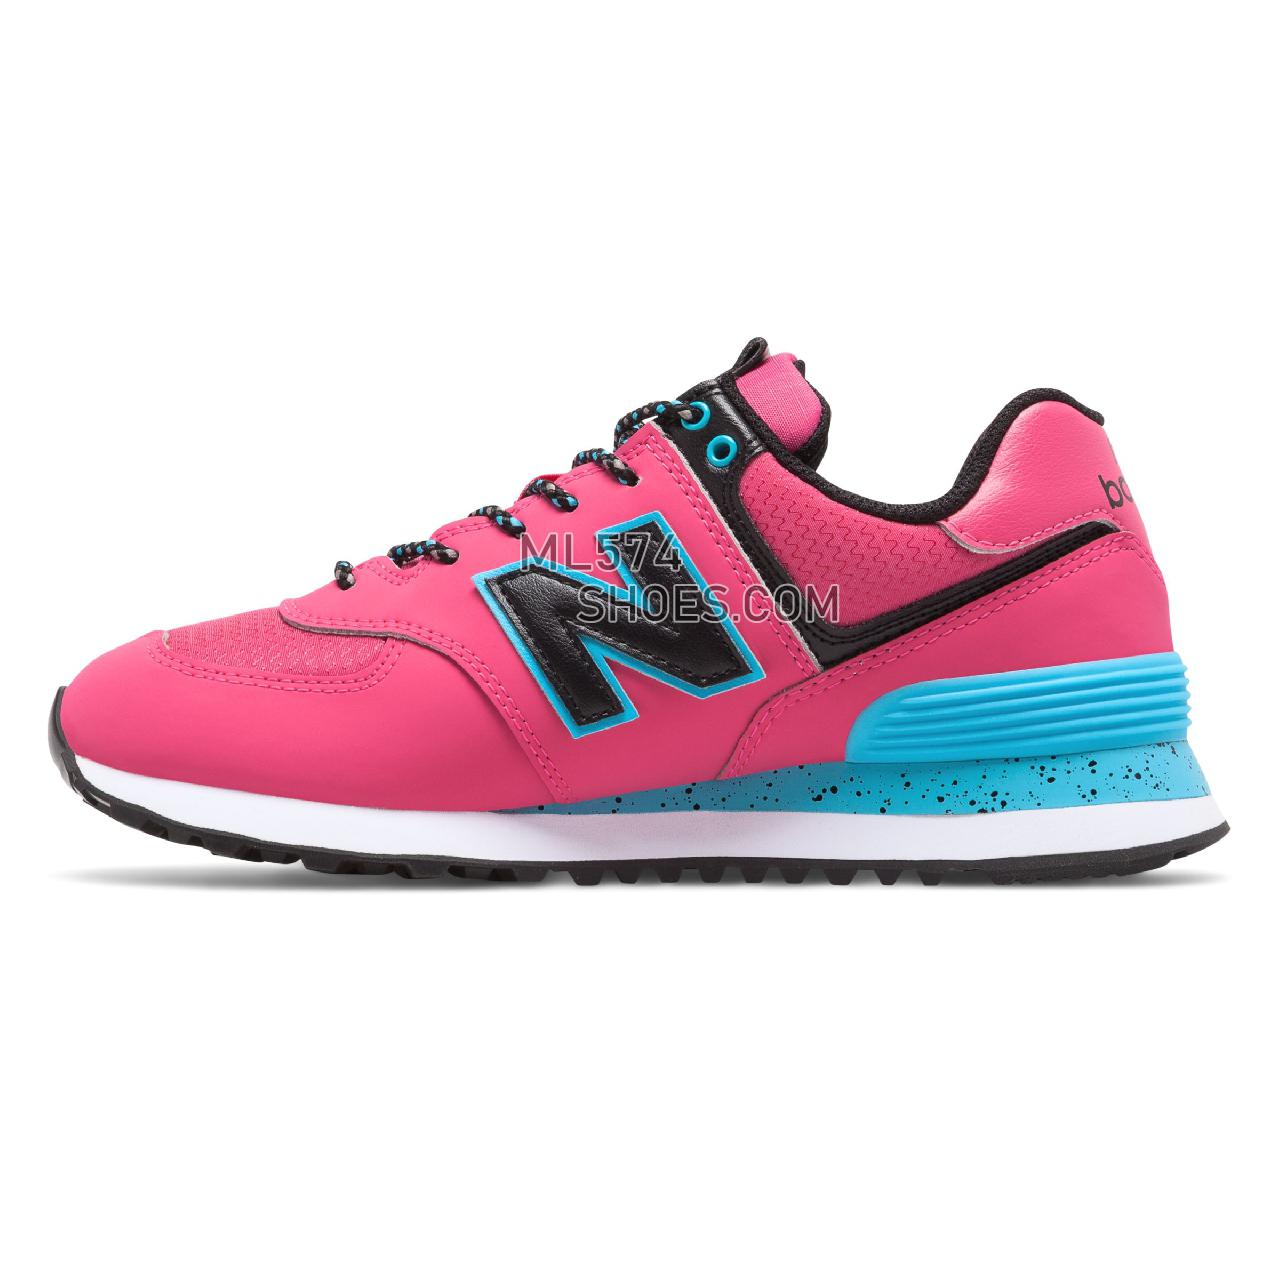 New Balance 574 - Women's Classic Sneakers - Pink with Black - WL574JOB